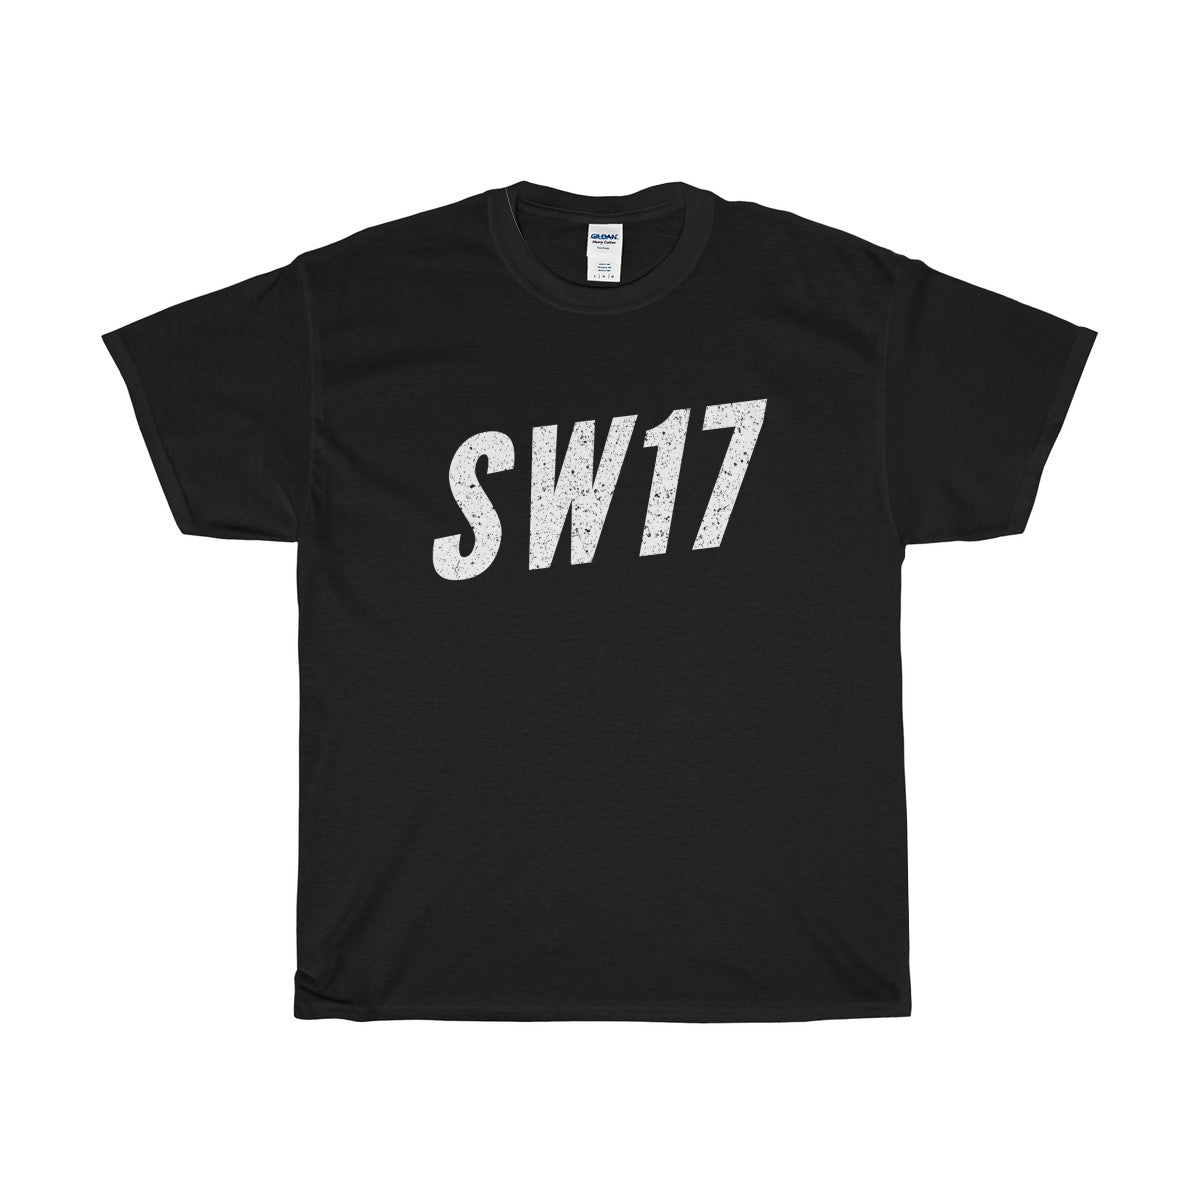 Tooting SW17 T-Shirt